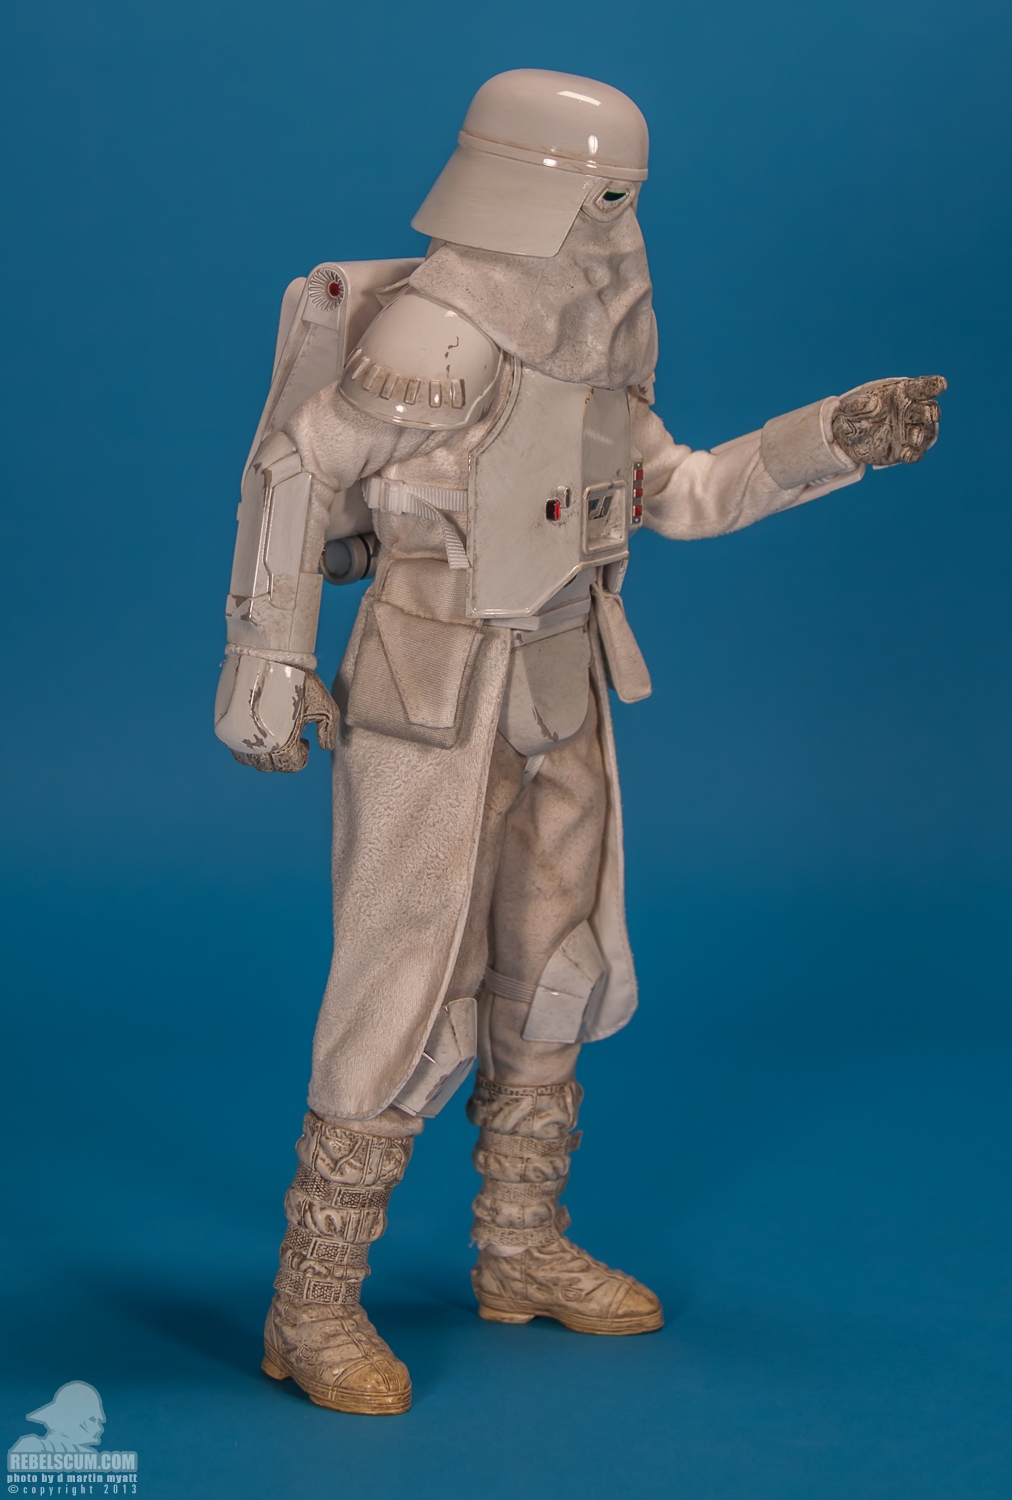 Snowtrooper_Militaries_Of_Star_Wars_Sideshow_Collectibles-02.jpg